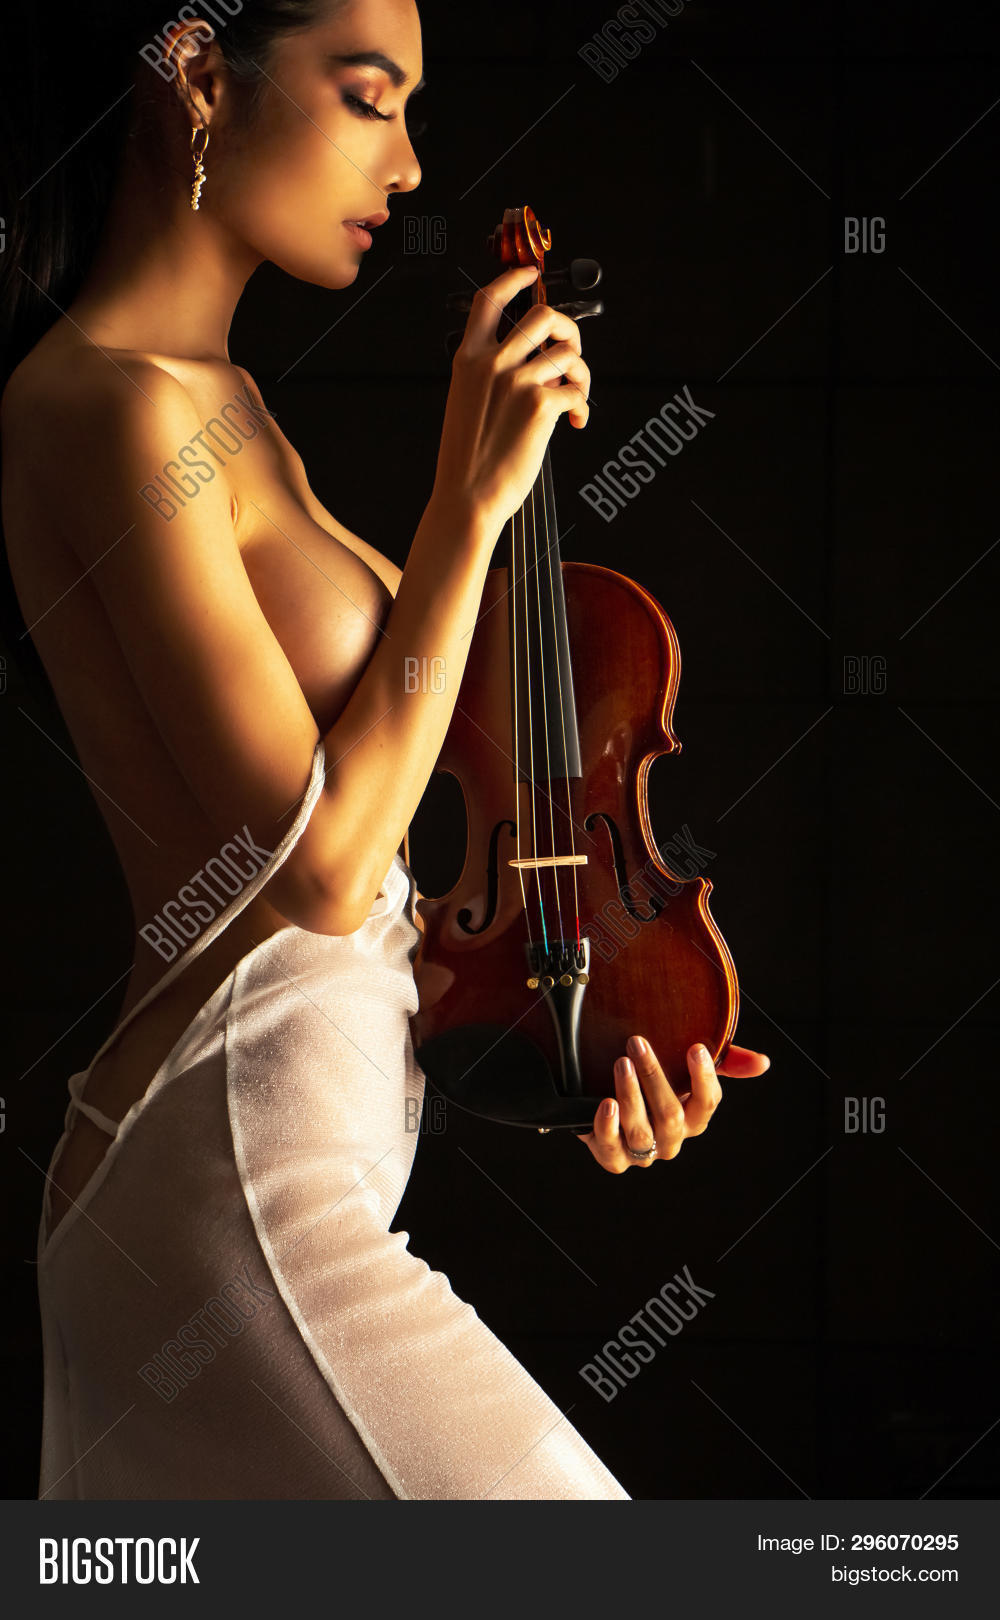 Best of Nude woman playing the violin